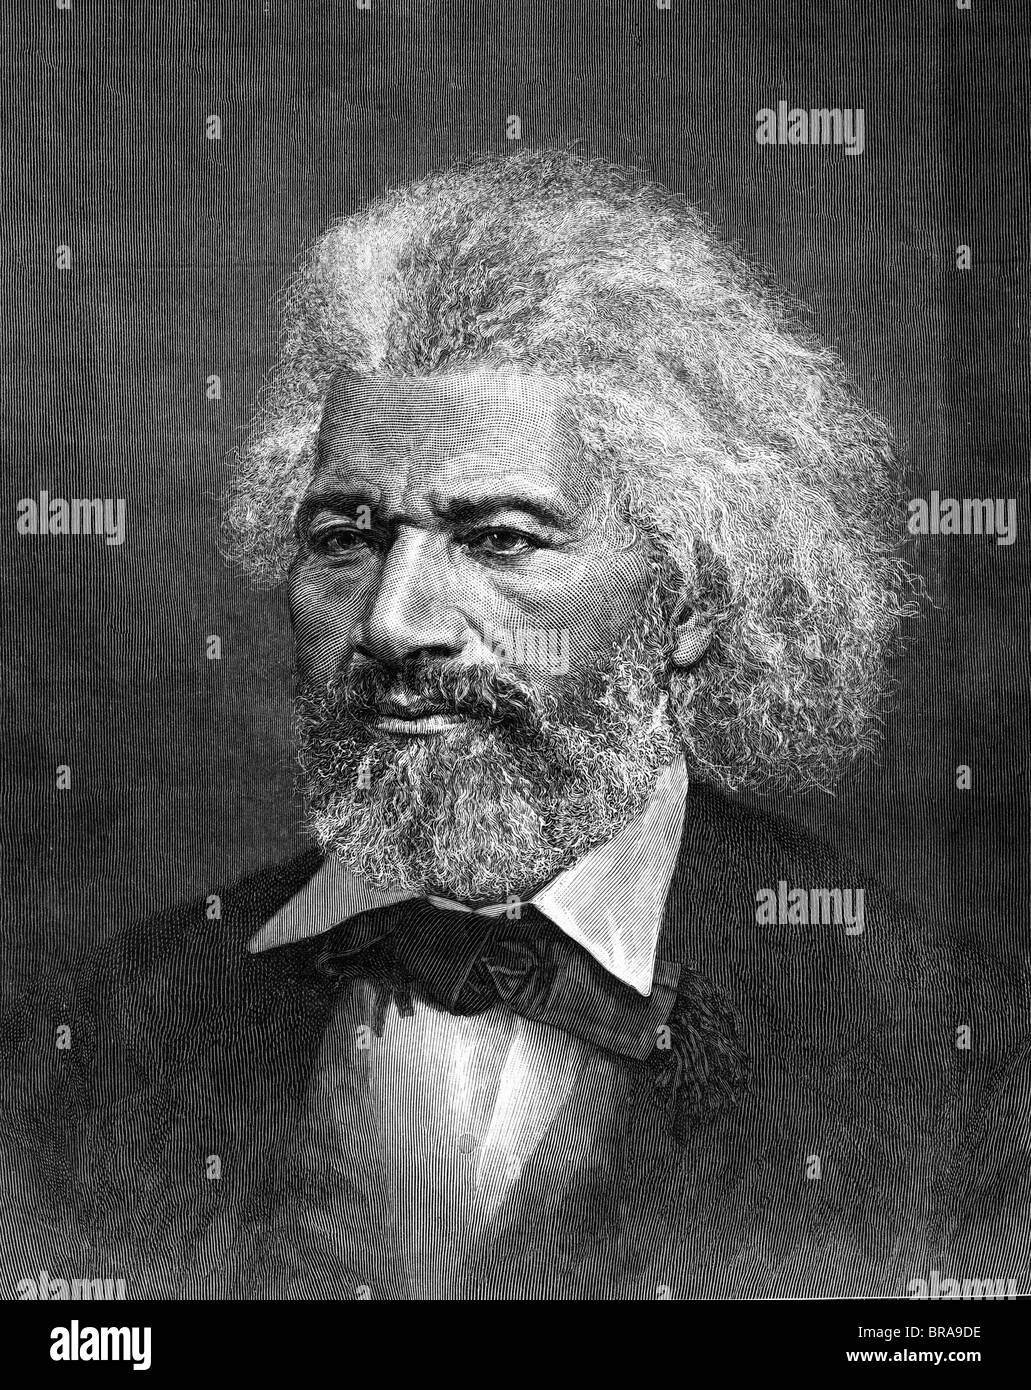 1800s 1895 PORTRAIT OF FREDERICK DOUGLASS AFRICAN-AMERICAN WRITER LECTURER ABOLITIONIST AT AGE OF 77 Stock Photo